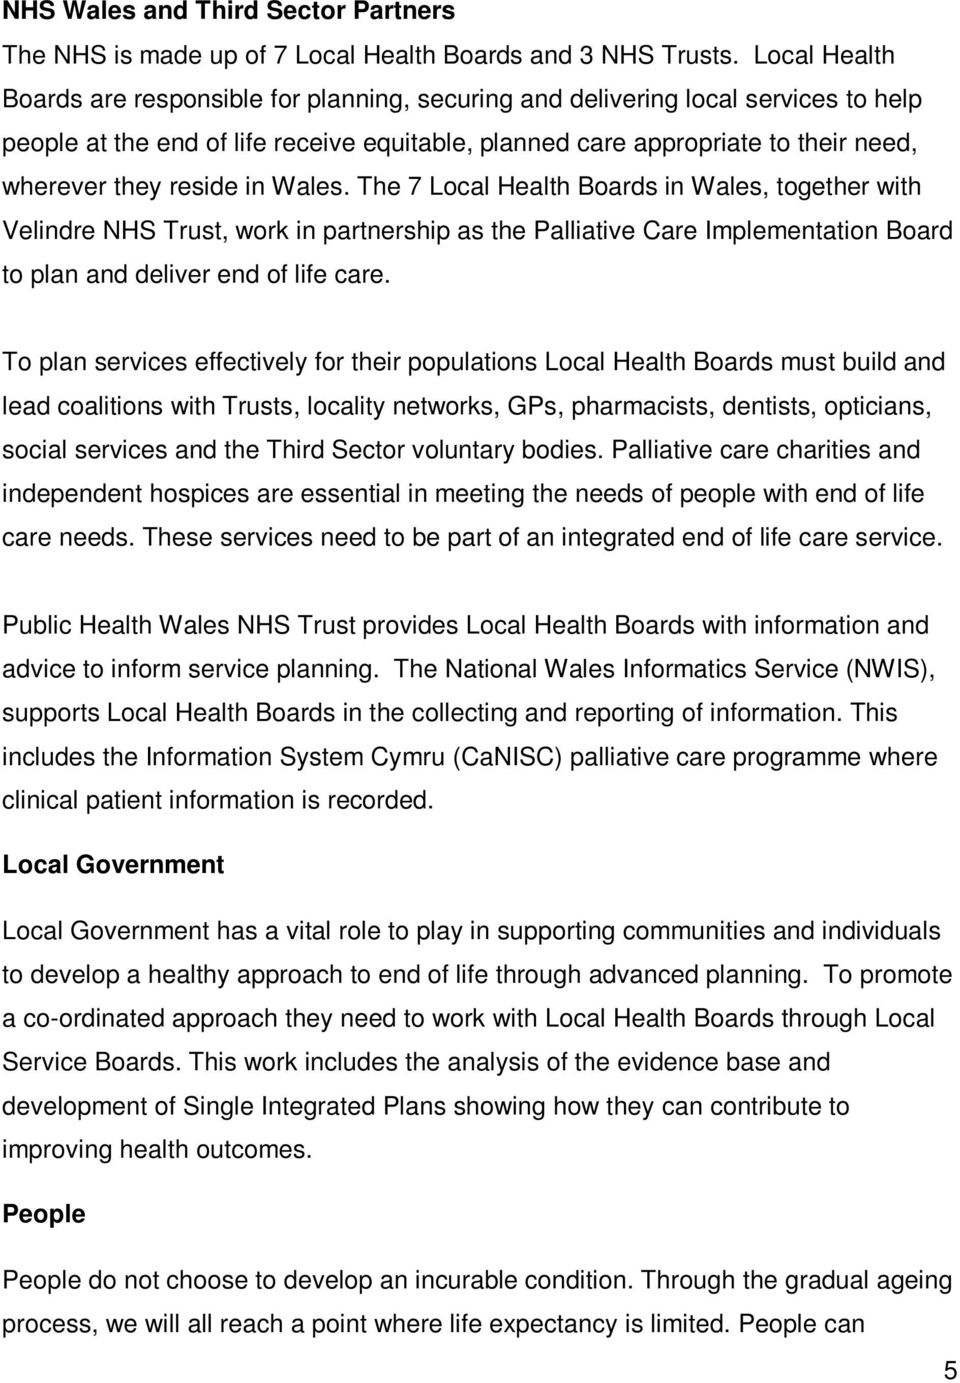 reside in Wales. The 7 Local Health Boards in Wales, together with Velindre NHS Trust, work in partnership as the Palliative Care Implementation Board to plan and deliver end of life care.